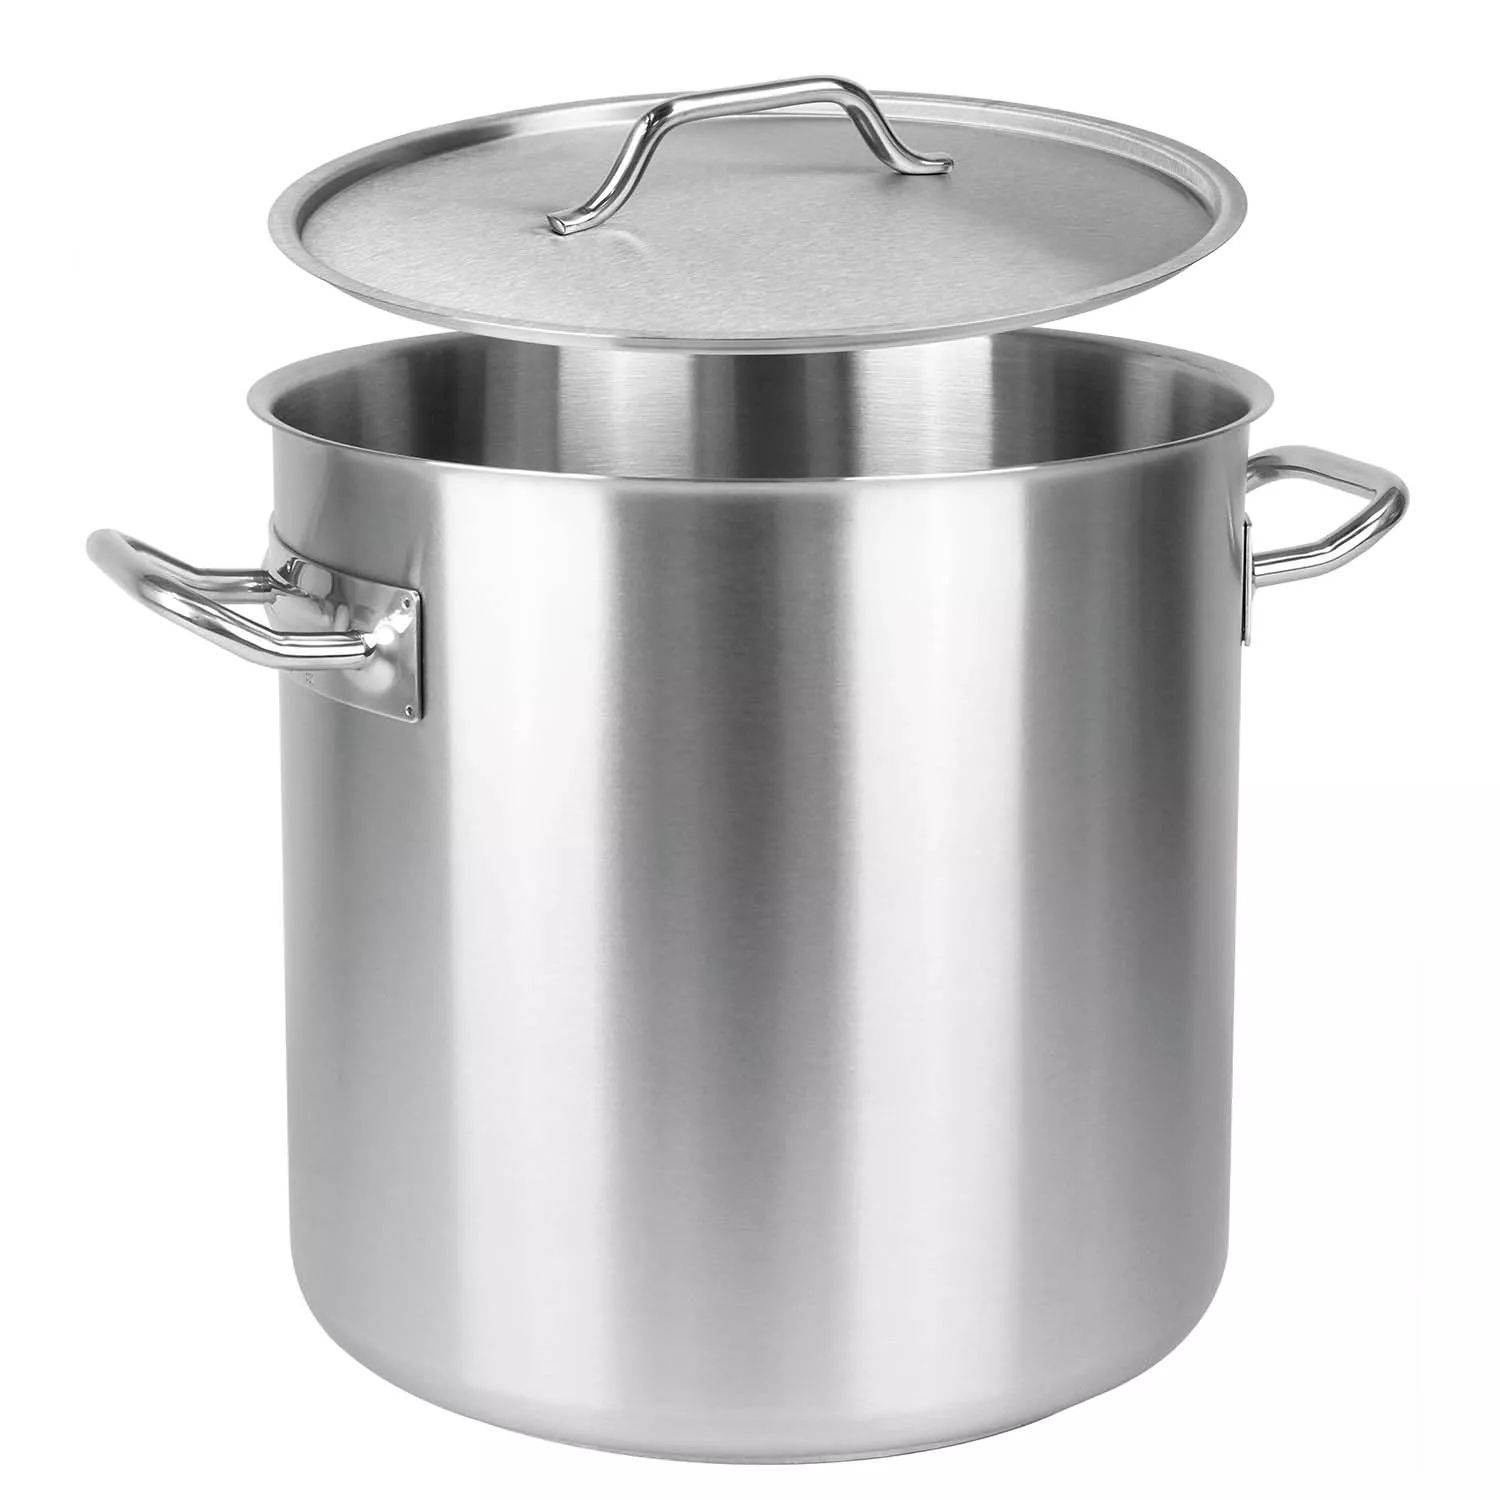 Stainless Steel Stockpot Kitchen Cooking Pot Thick Bottom Heavy Duty Dual  Handle Nonstick Soup Pot Small Saucepan for Cooking Warming Milk